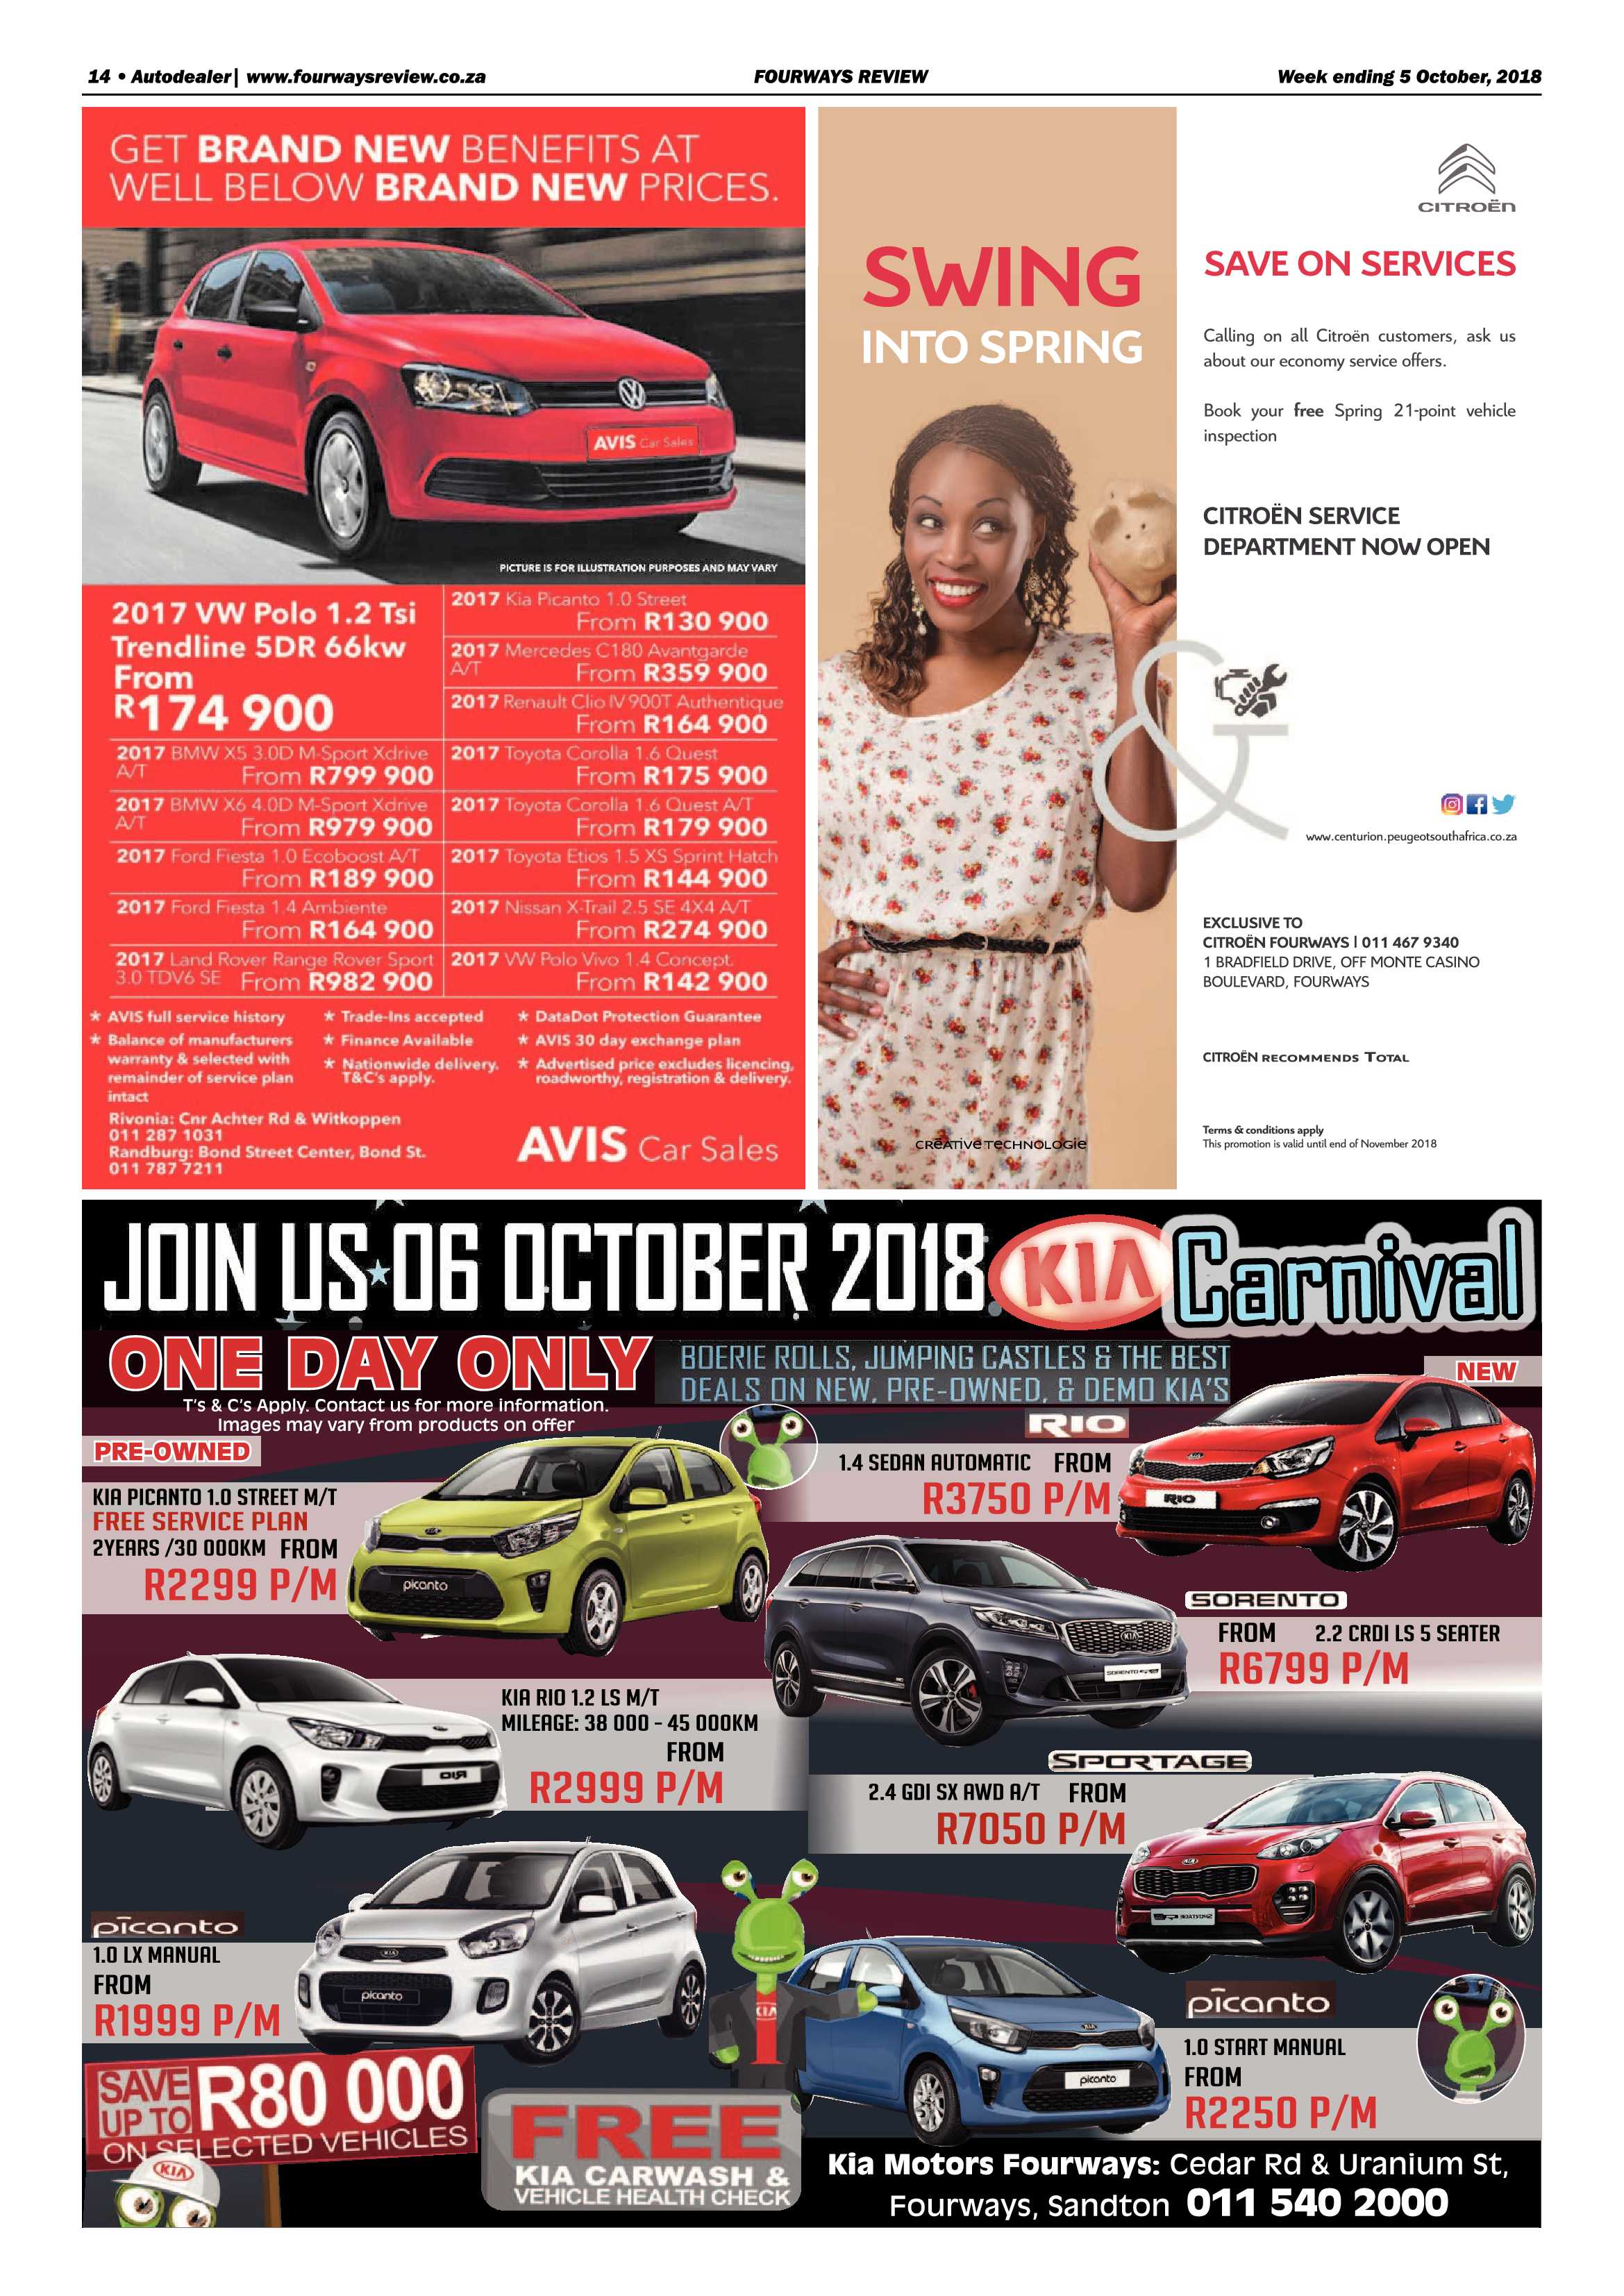 Fourways Review 5 October, 2018 page 14